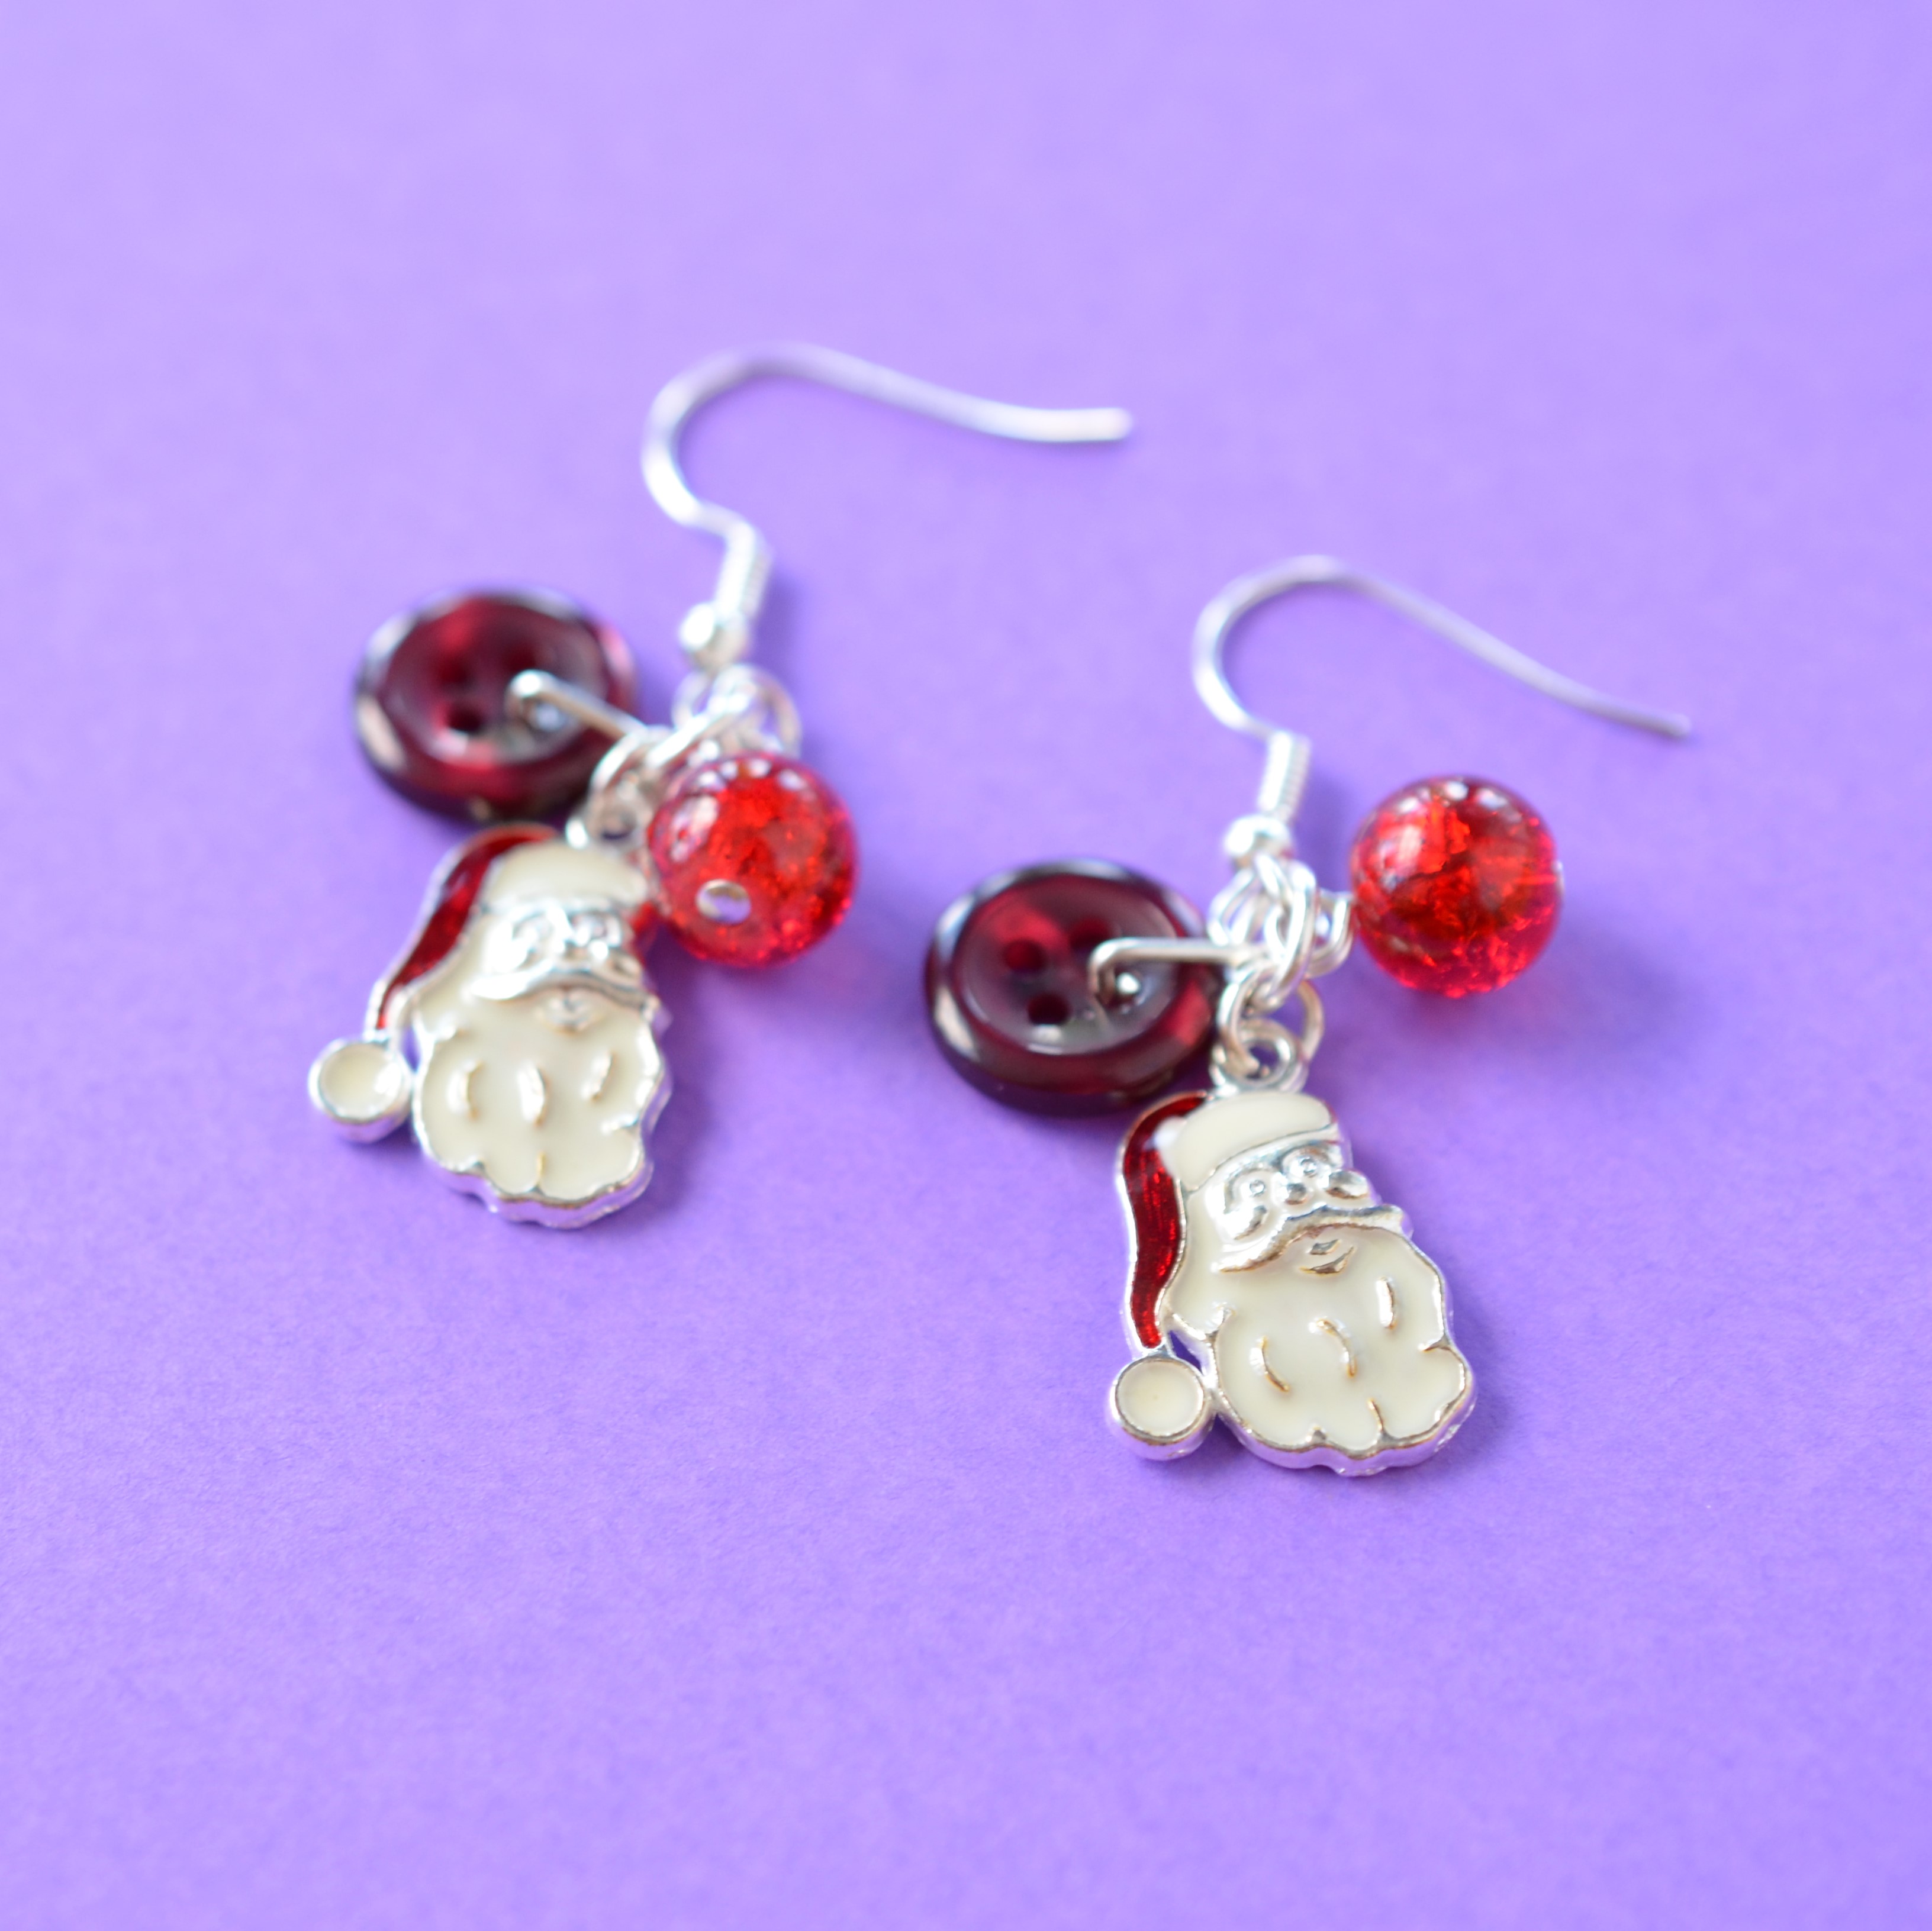 Red & White Santa Claus Cluster Button Charm Earrings